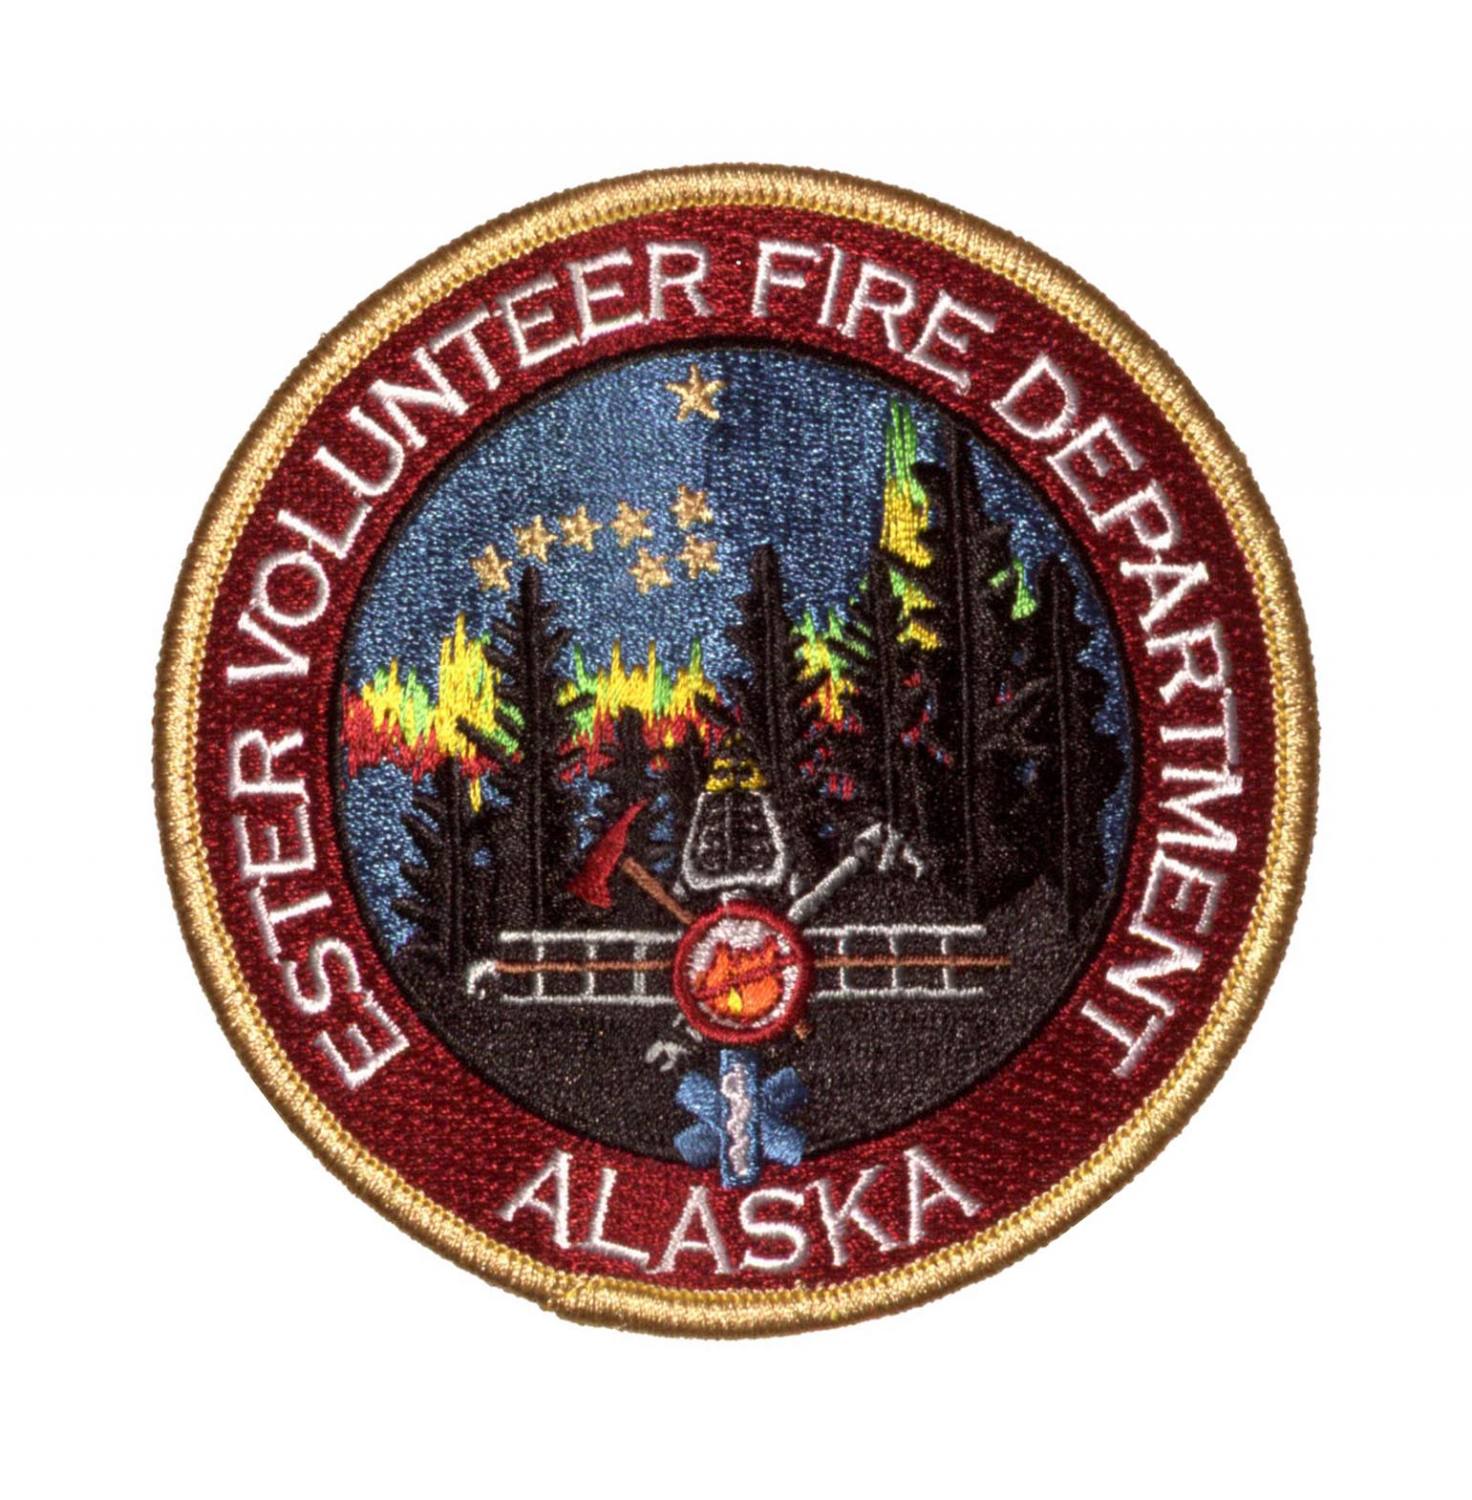 Volunteer Fire patches